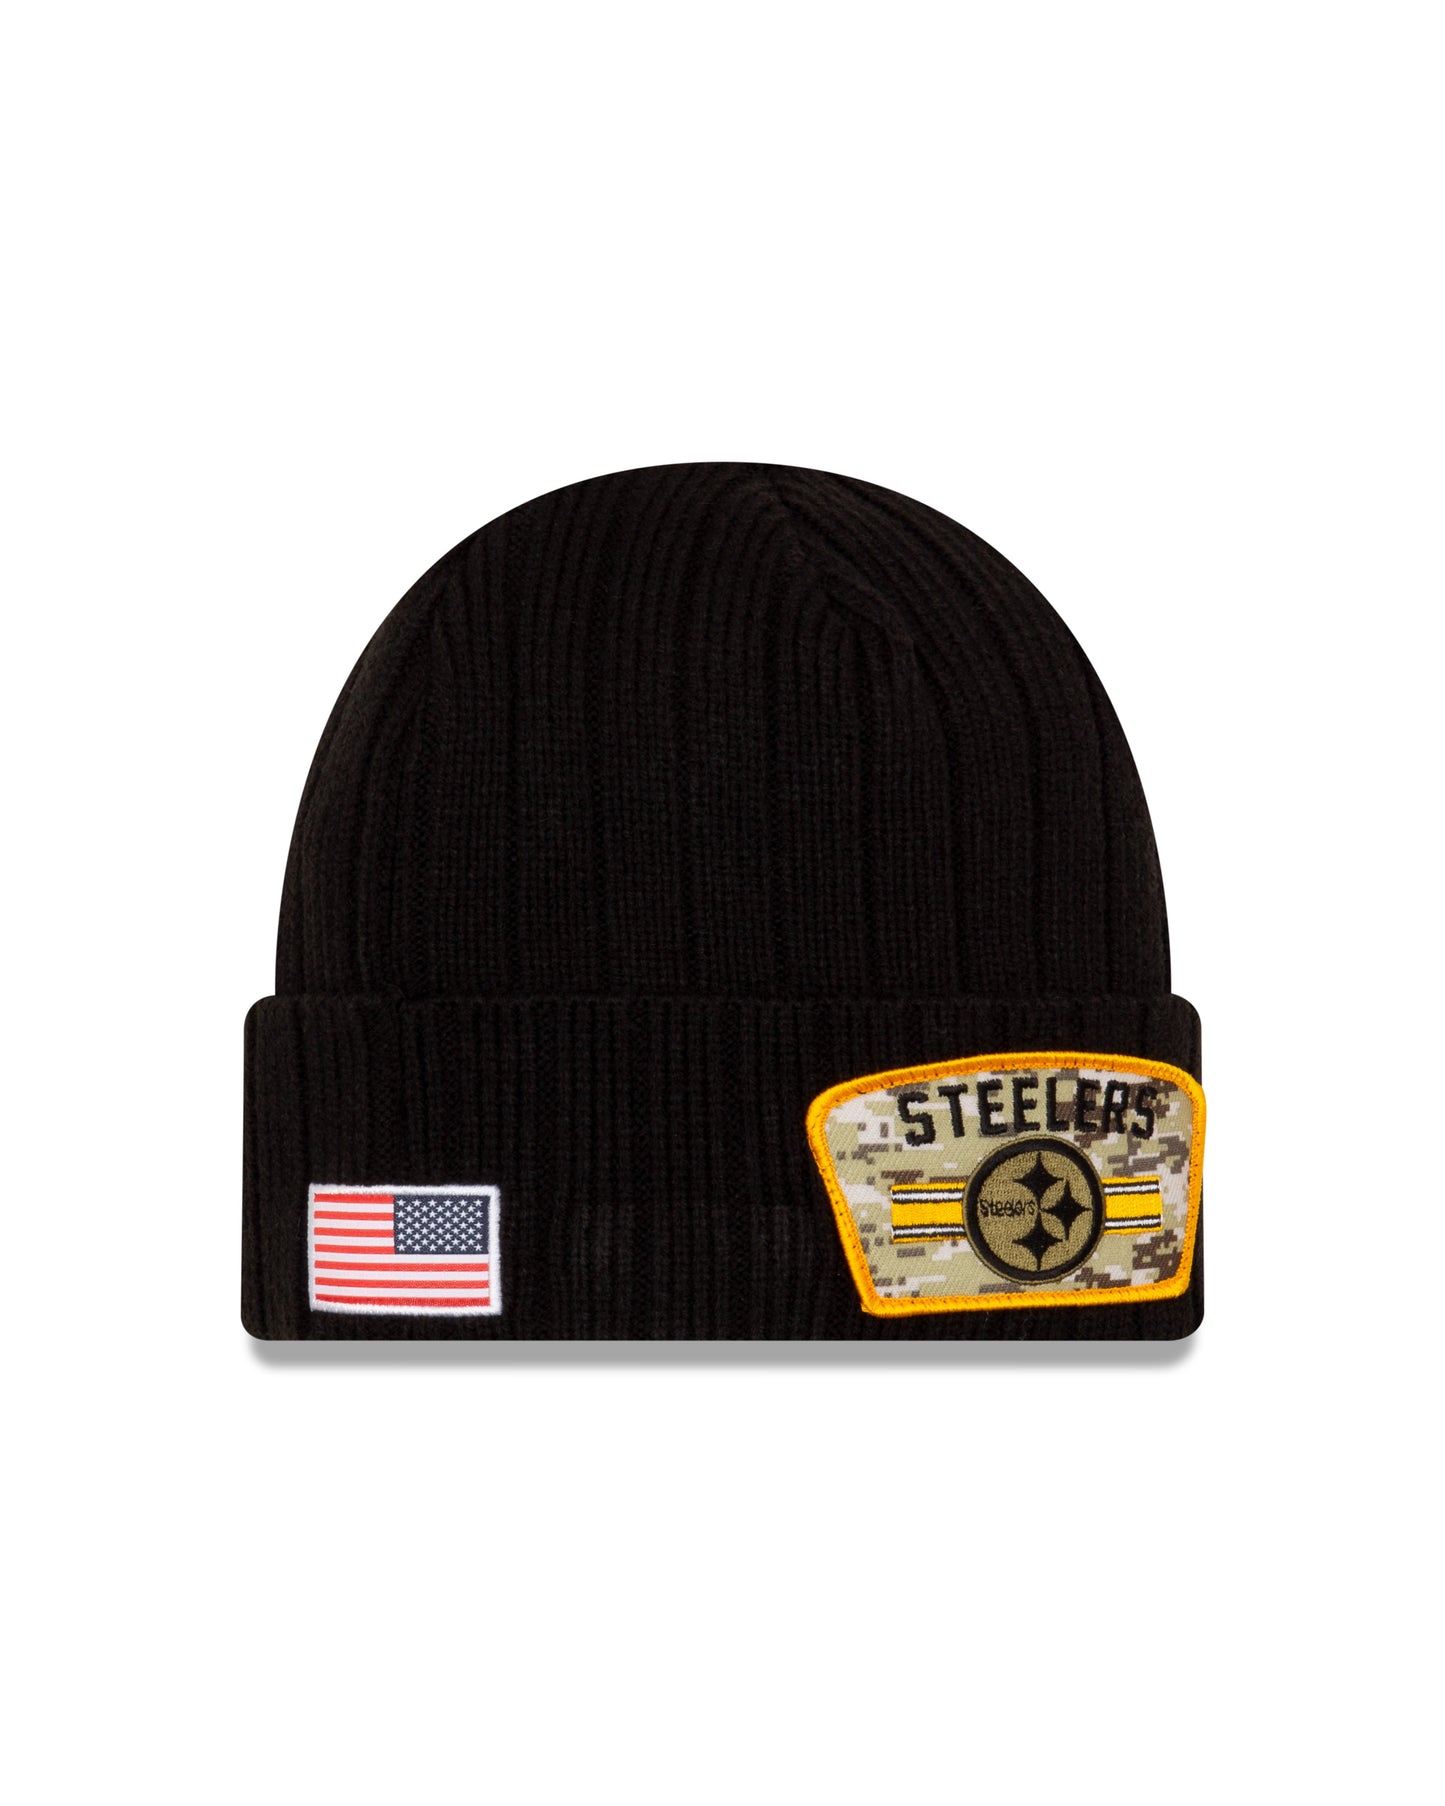 Pittsburgh Steelers 2021 Sideline Salute to Service Knit Hat - Black